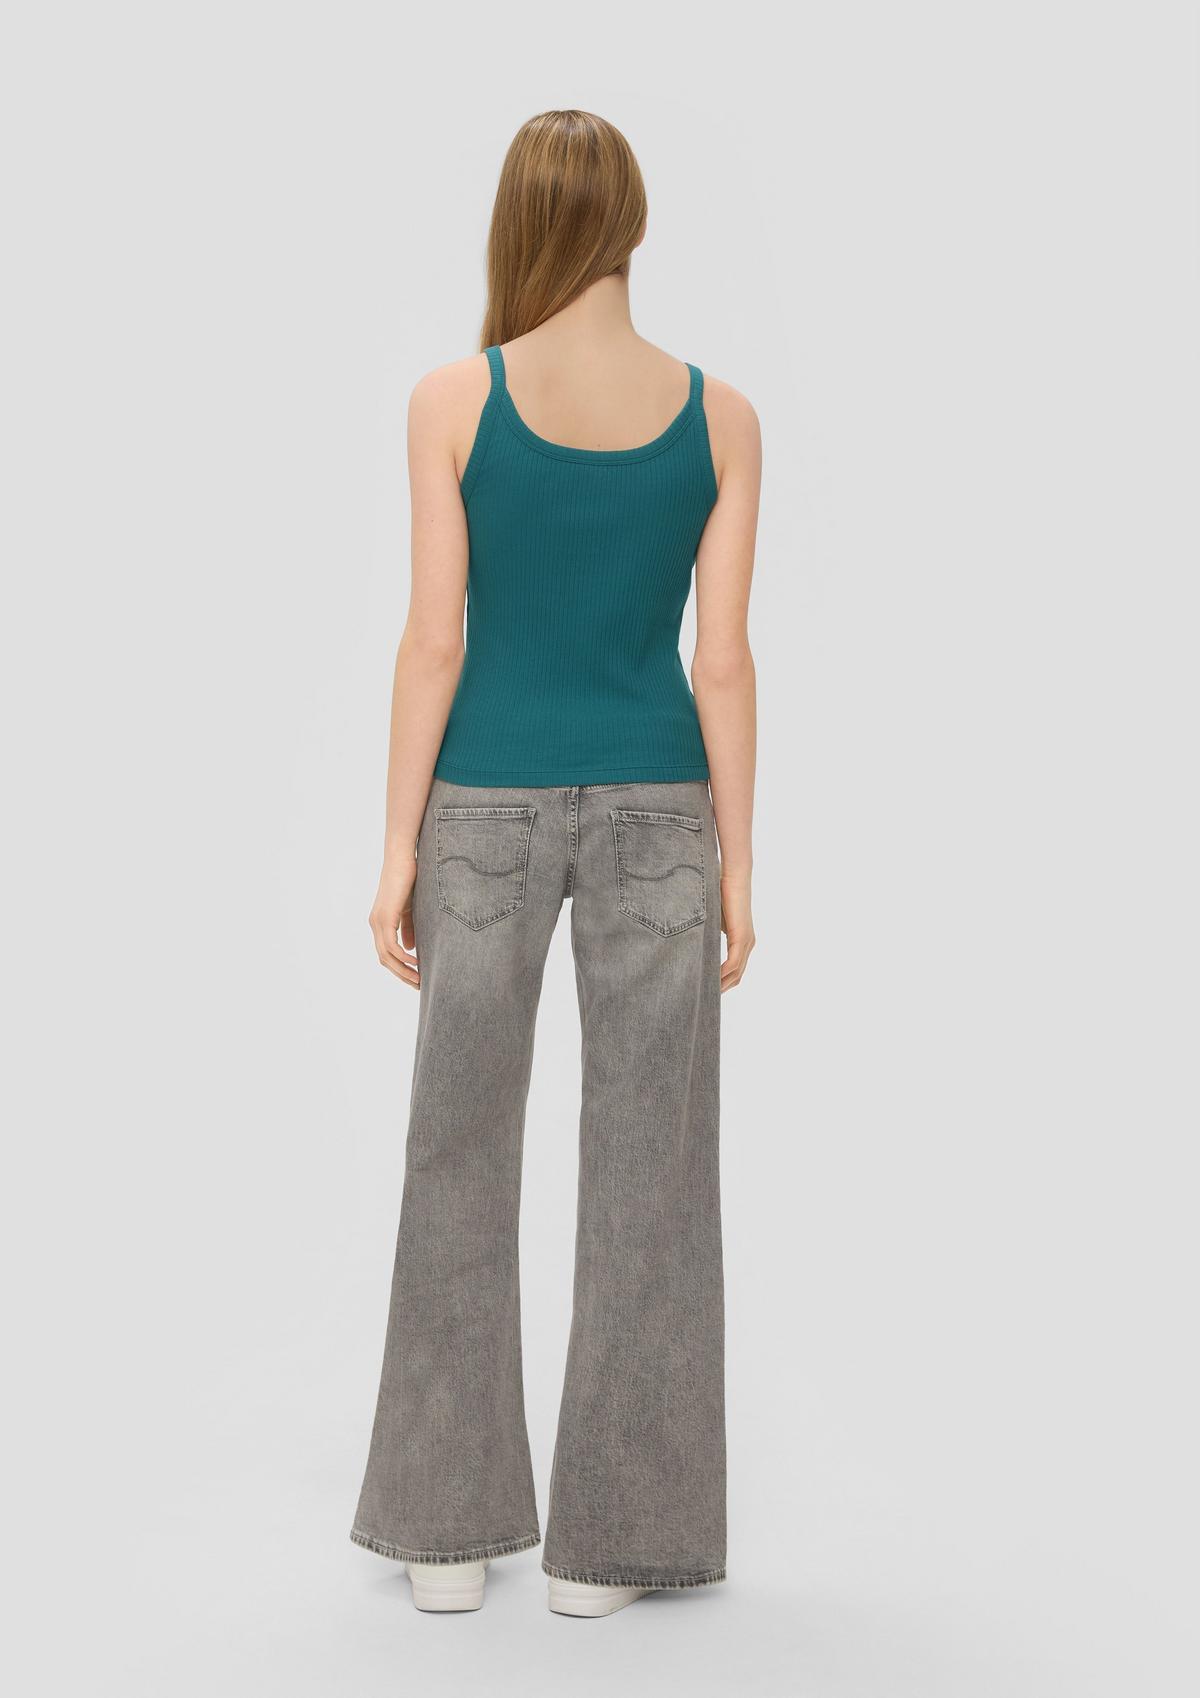 s.Oliver Sleeveless top with ribbed texture